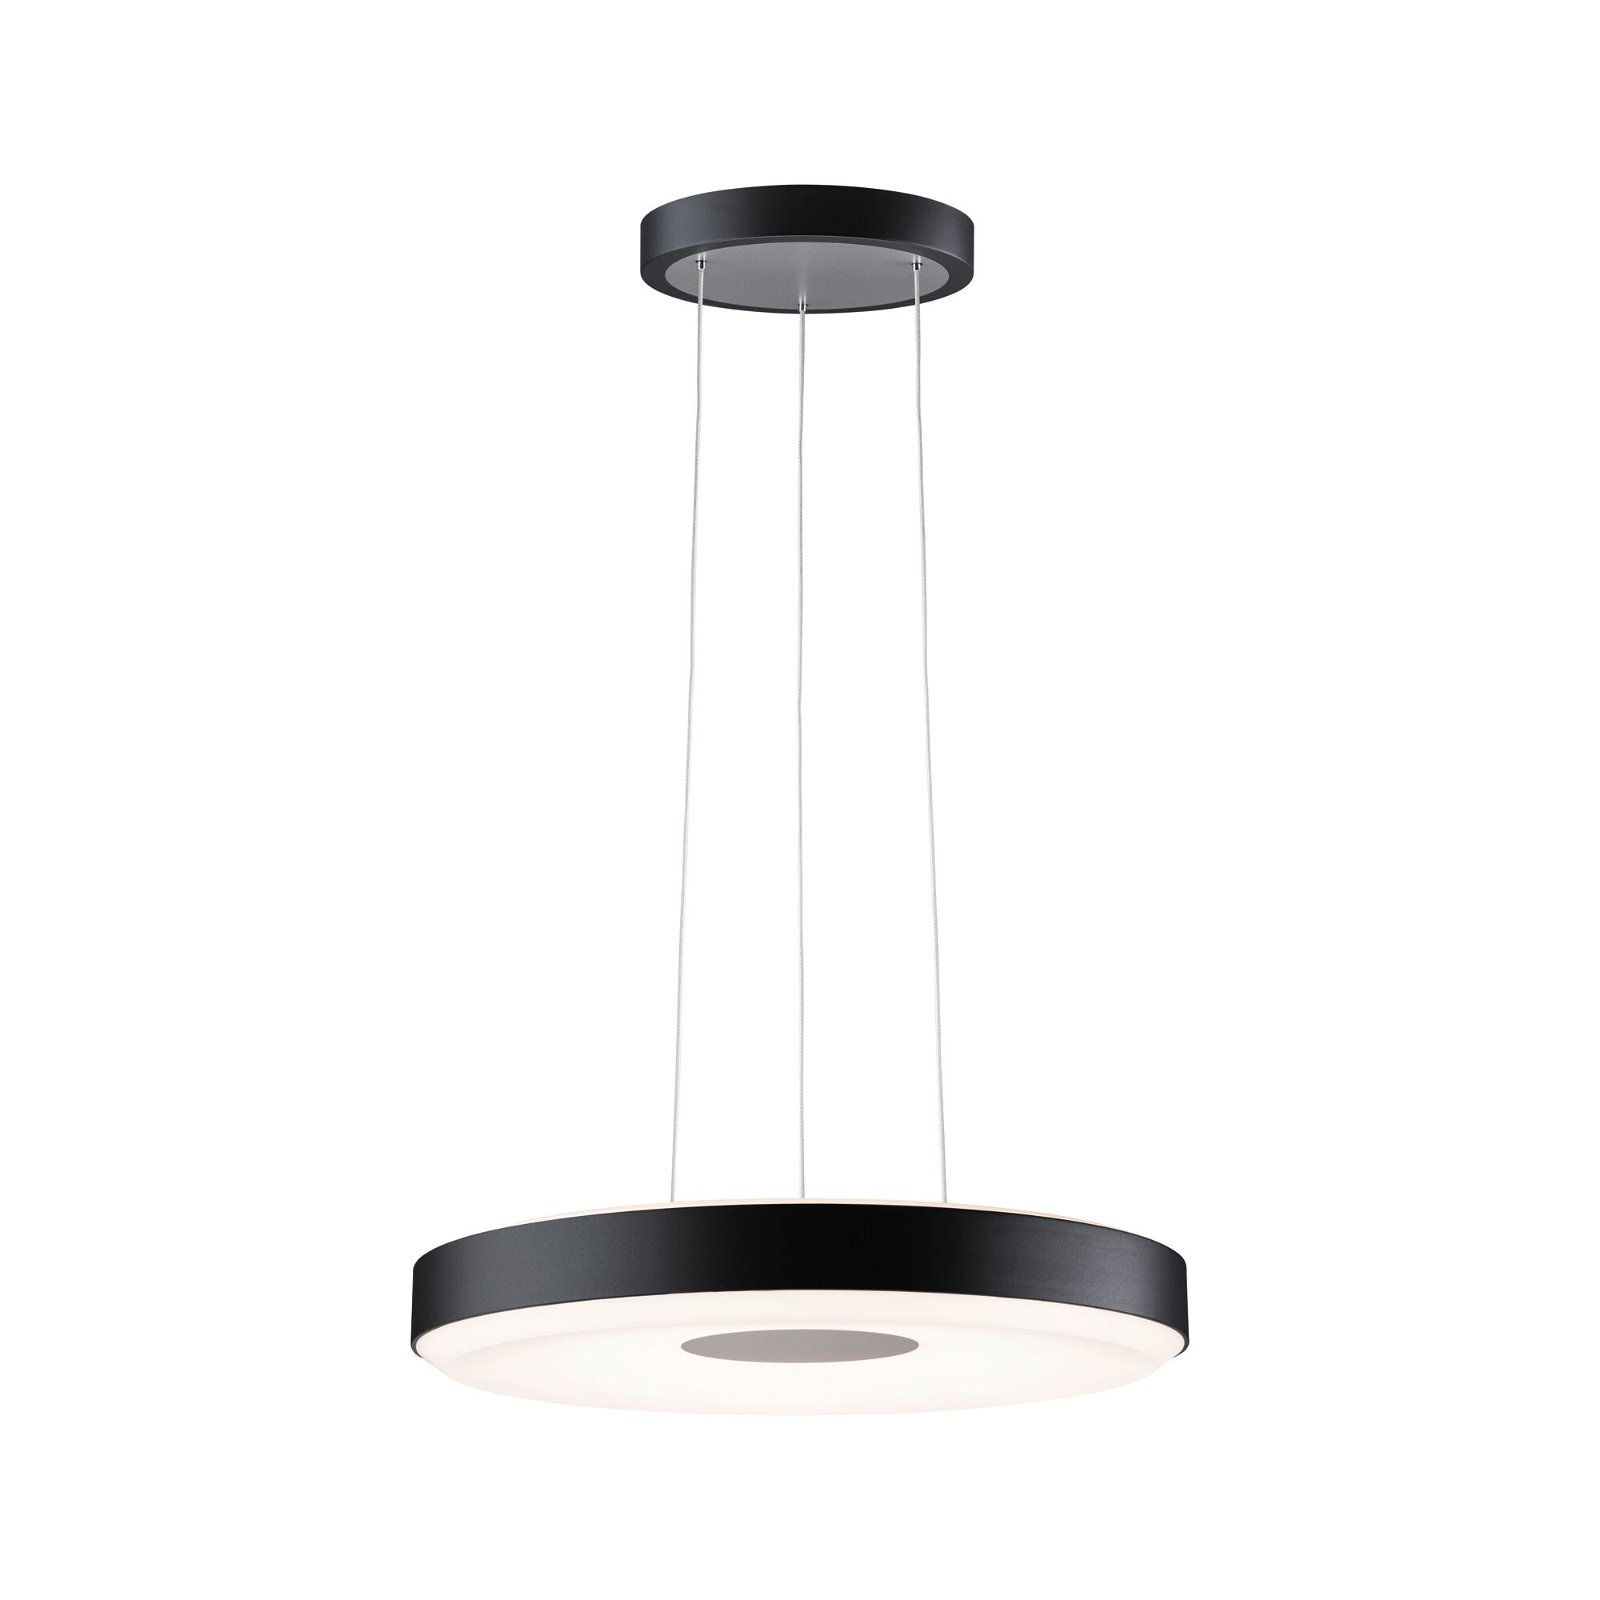 LED Pendant luminaire Smart Home Zigbee 3.0 Puric Pane 2700K 1.200lm / 700lm 11 / 1x7W Black/Grey dimmable